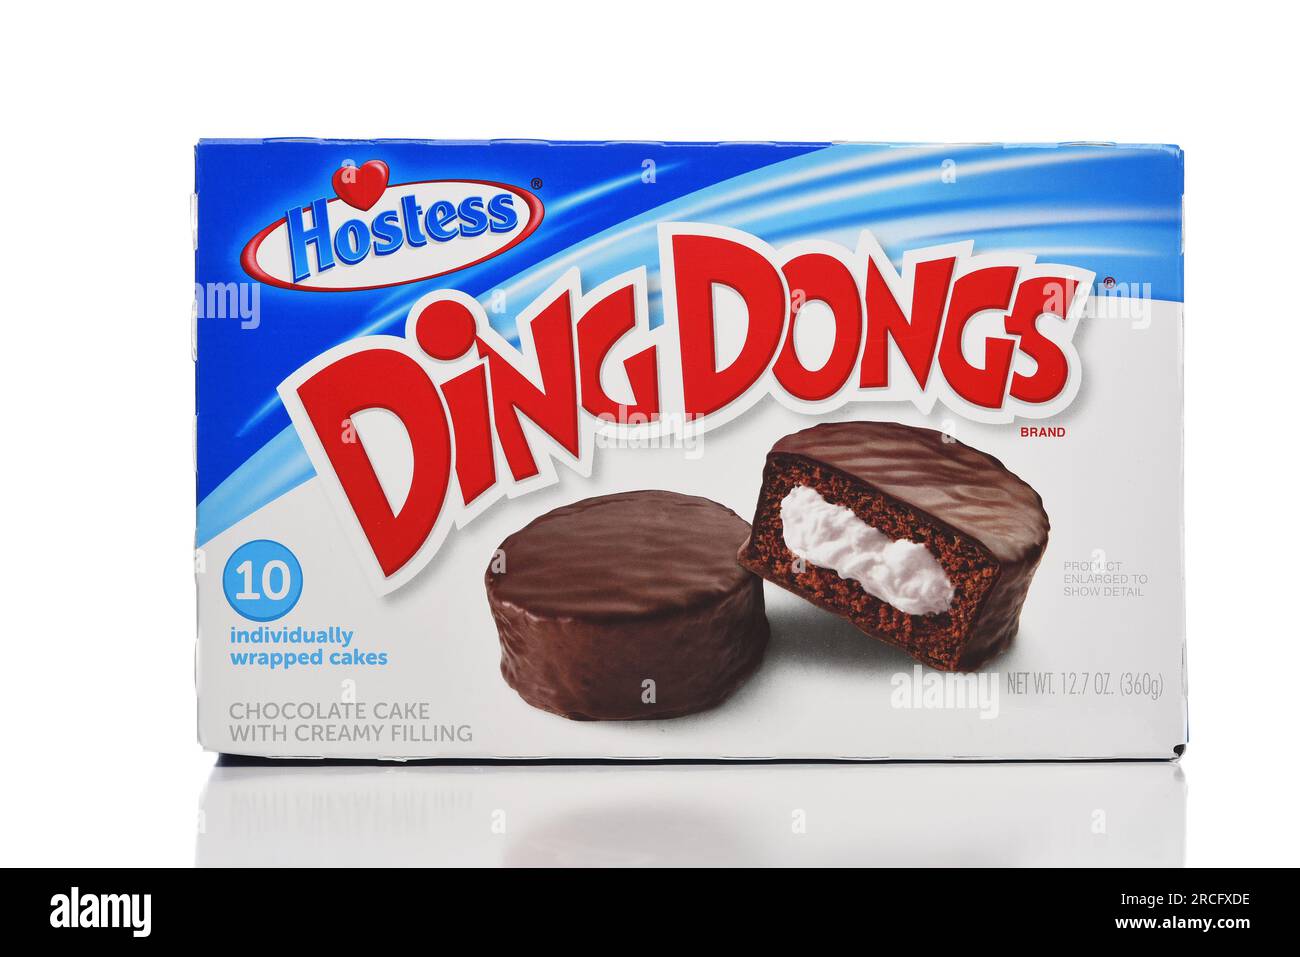 IRVINE, CALIFORNIA - 14 JULY 2023: a box of Hostess Ding Dongs individually wrapped cakes. Stock Photo